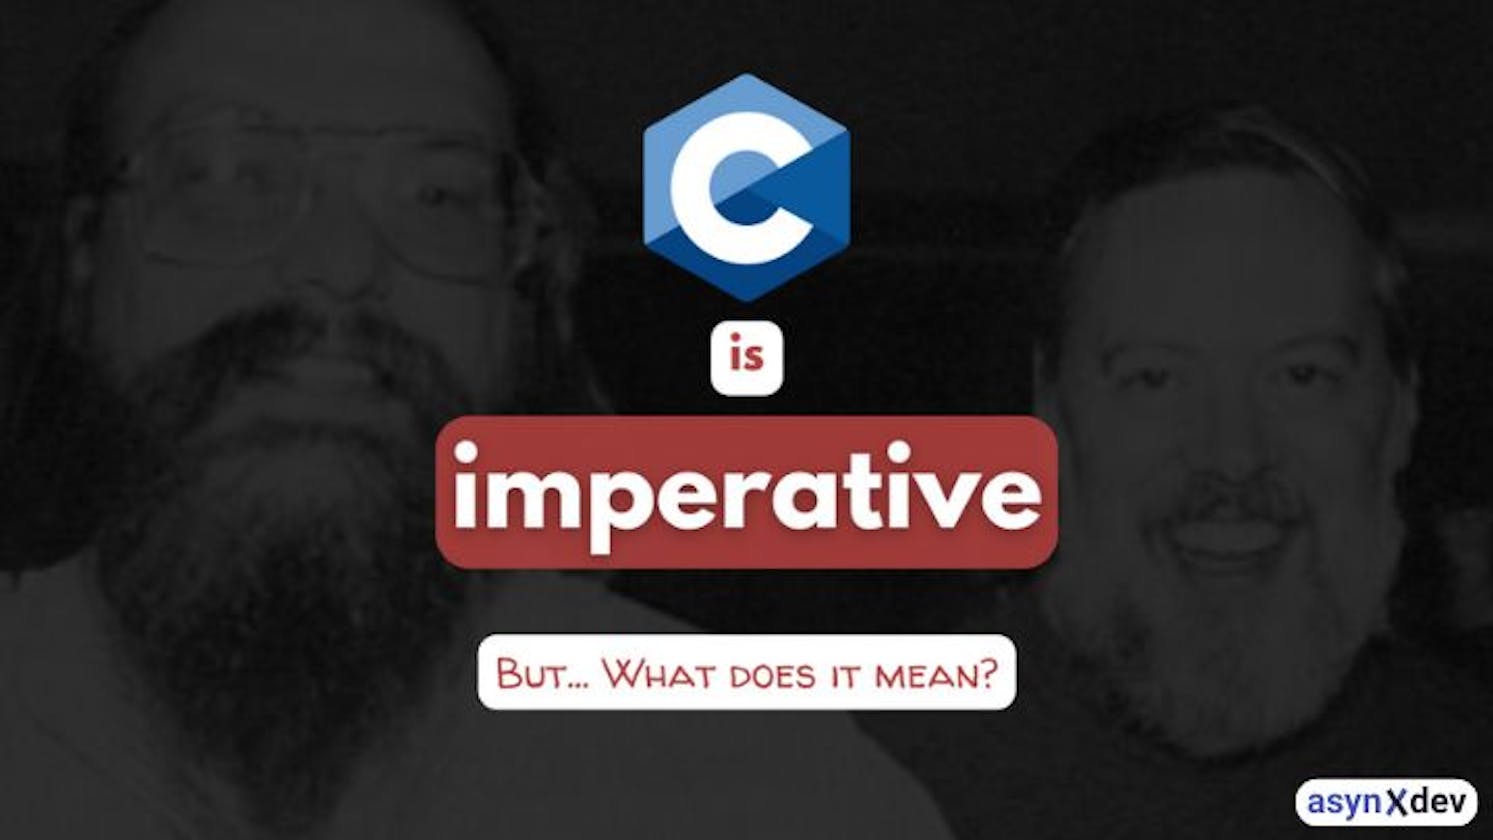 C is an imperative language